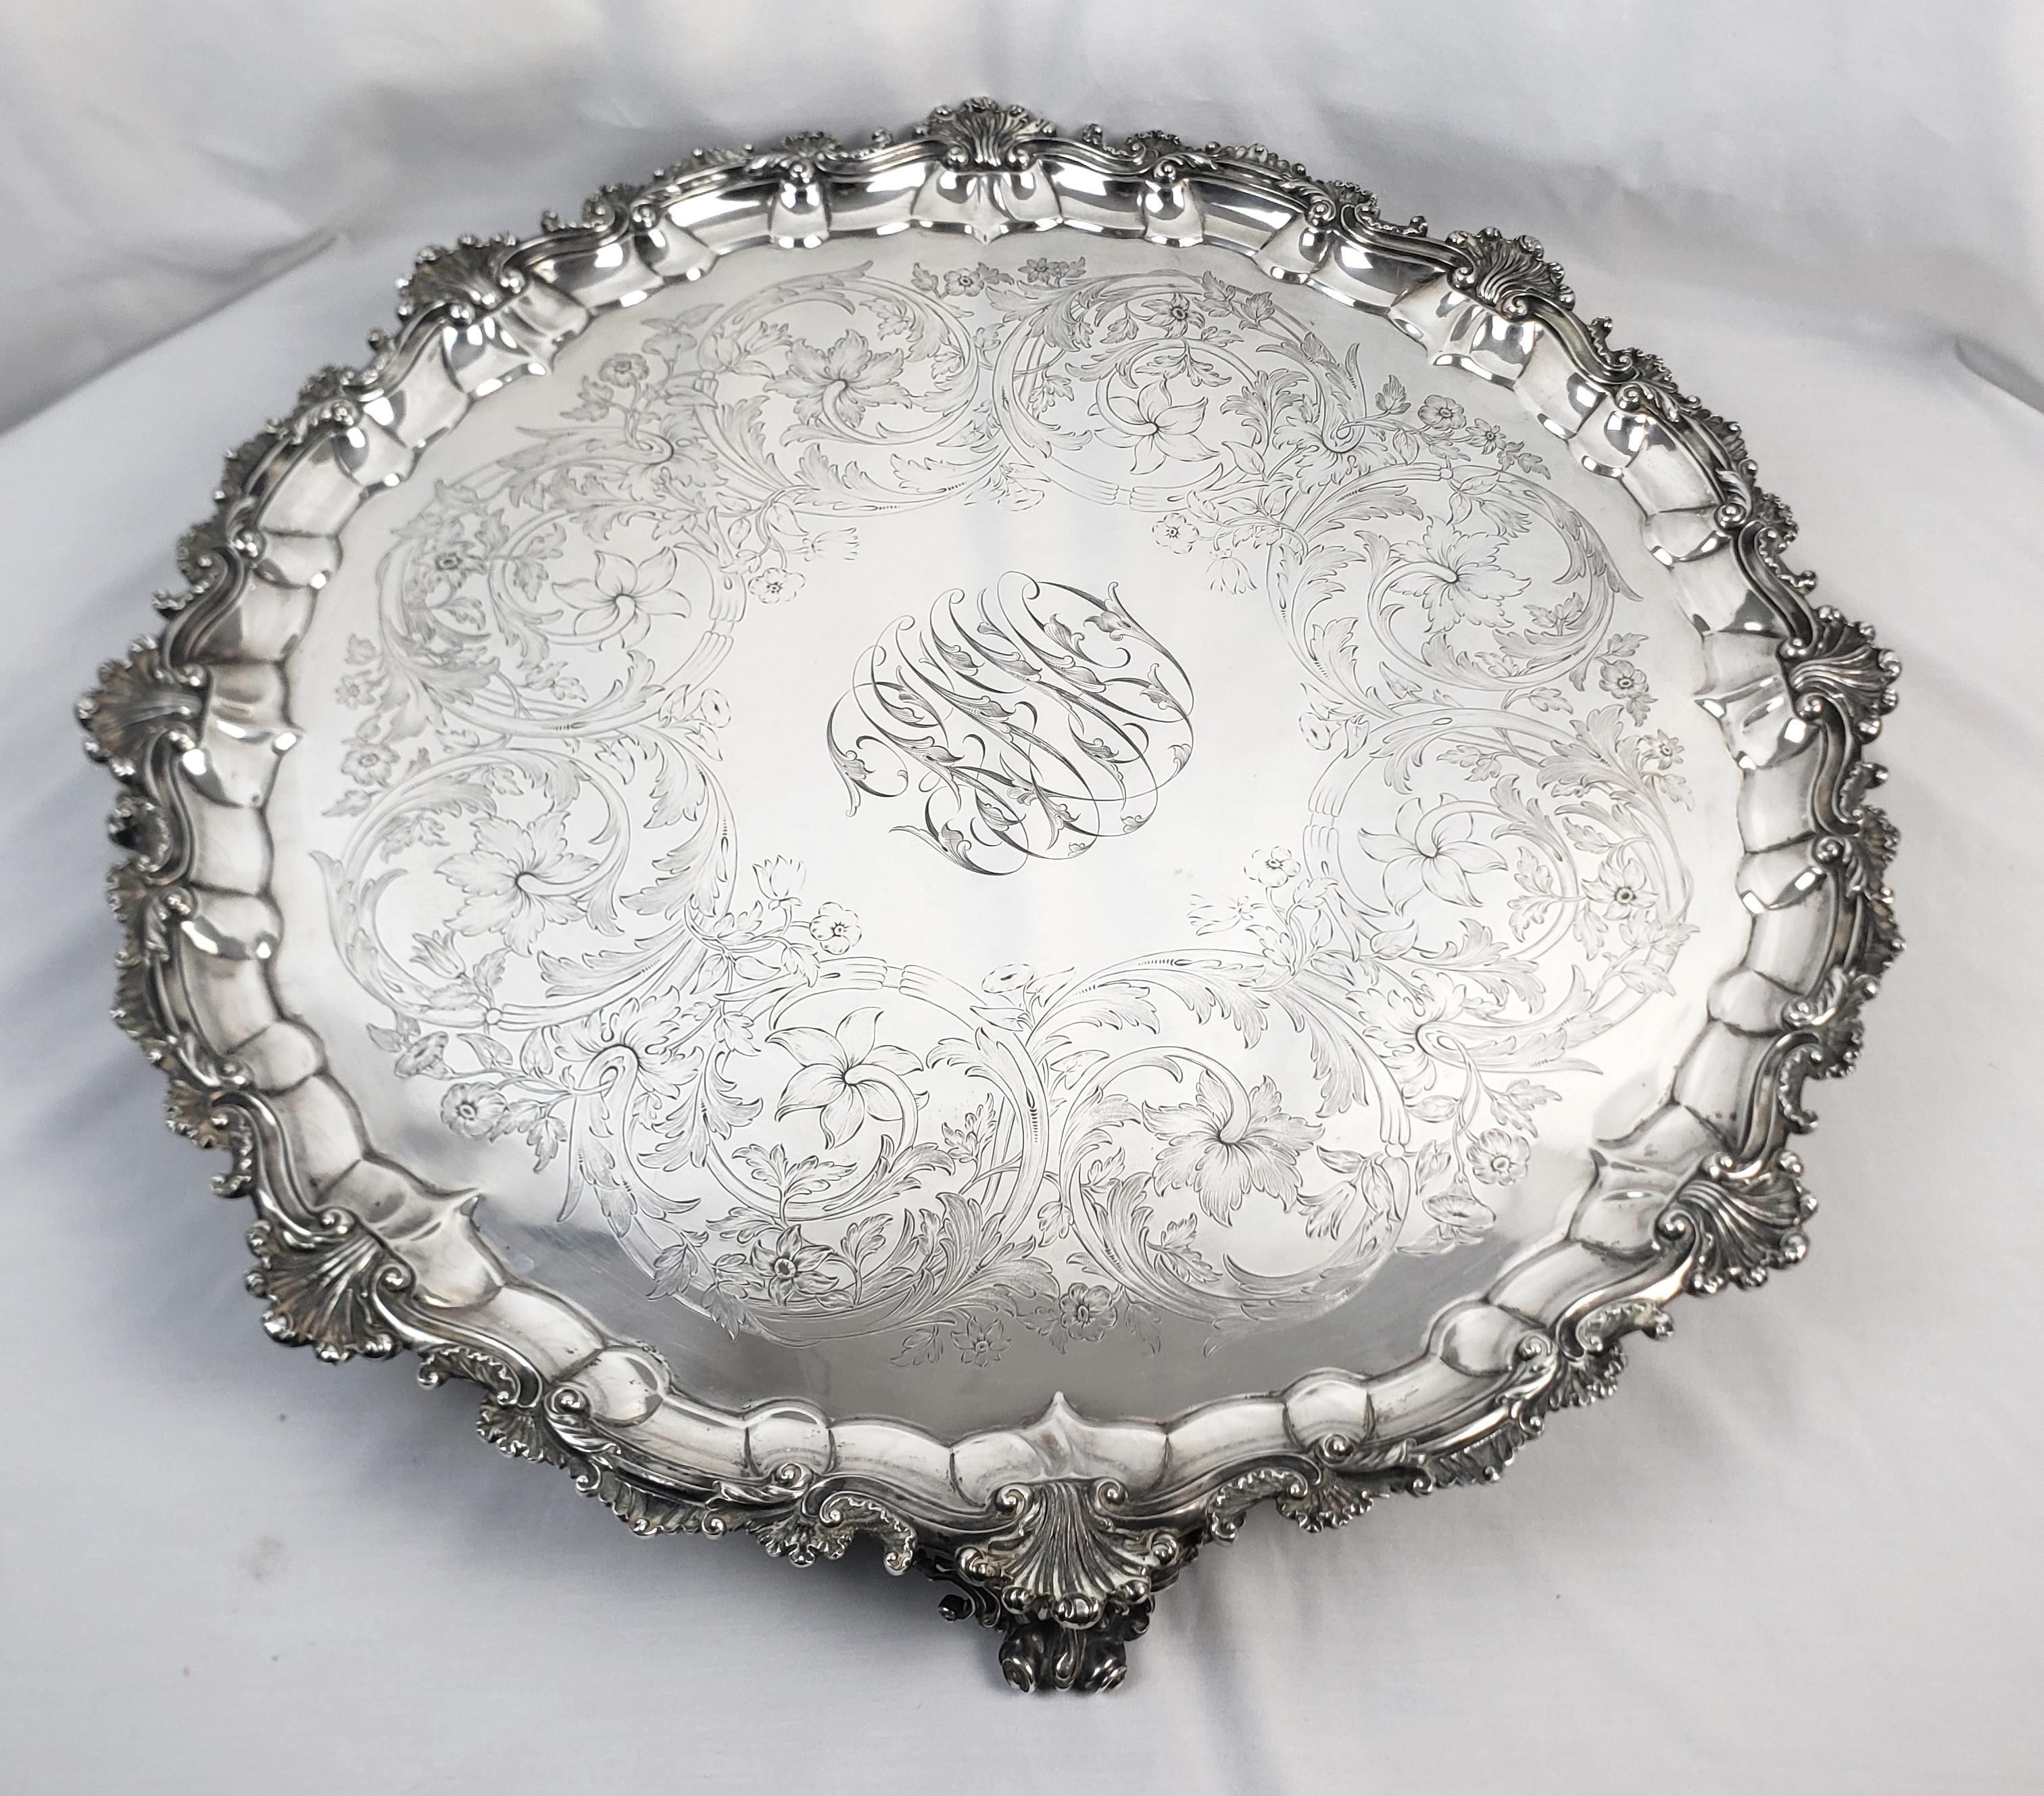 English Huge Antique Sterling Silver Salver or Footed Tray with Ornate Floral Engraving For Sale